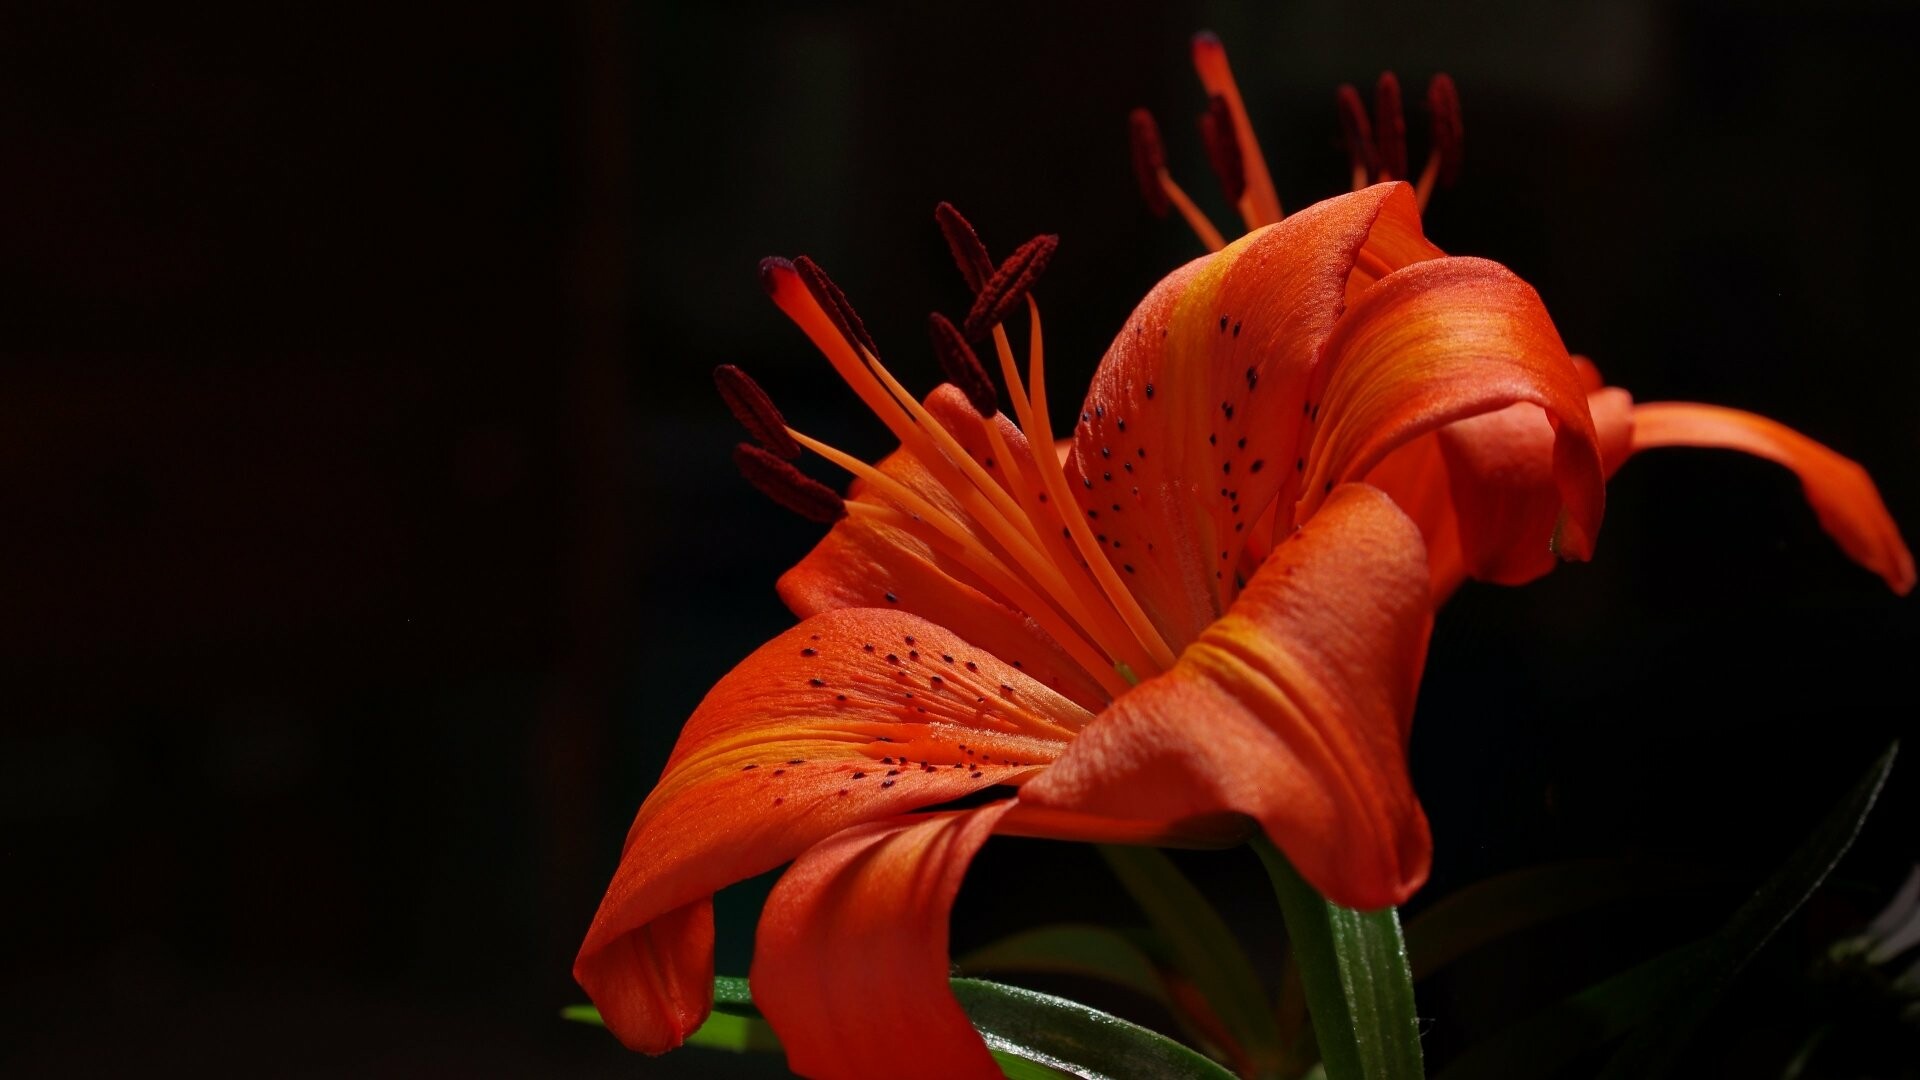 4K ultra HD, Lily wallpapers, Stunning backgrounds, Beautiful images, 1920x1080 Full HD Desktop